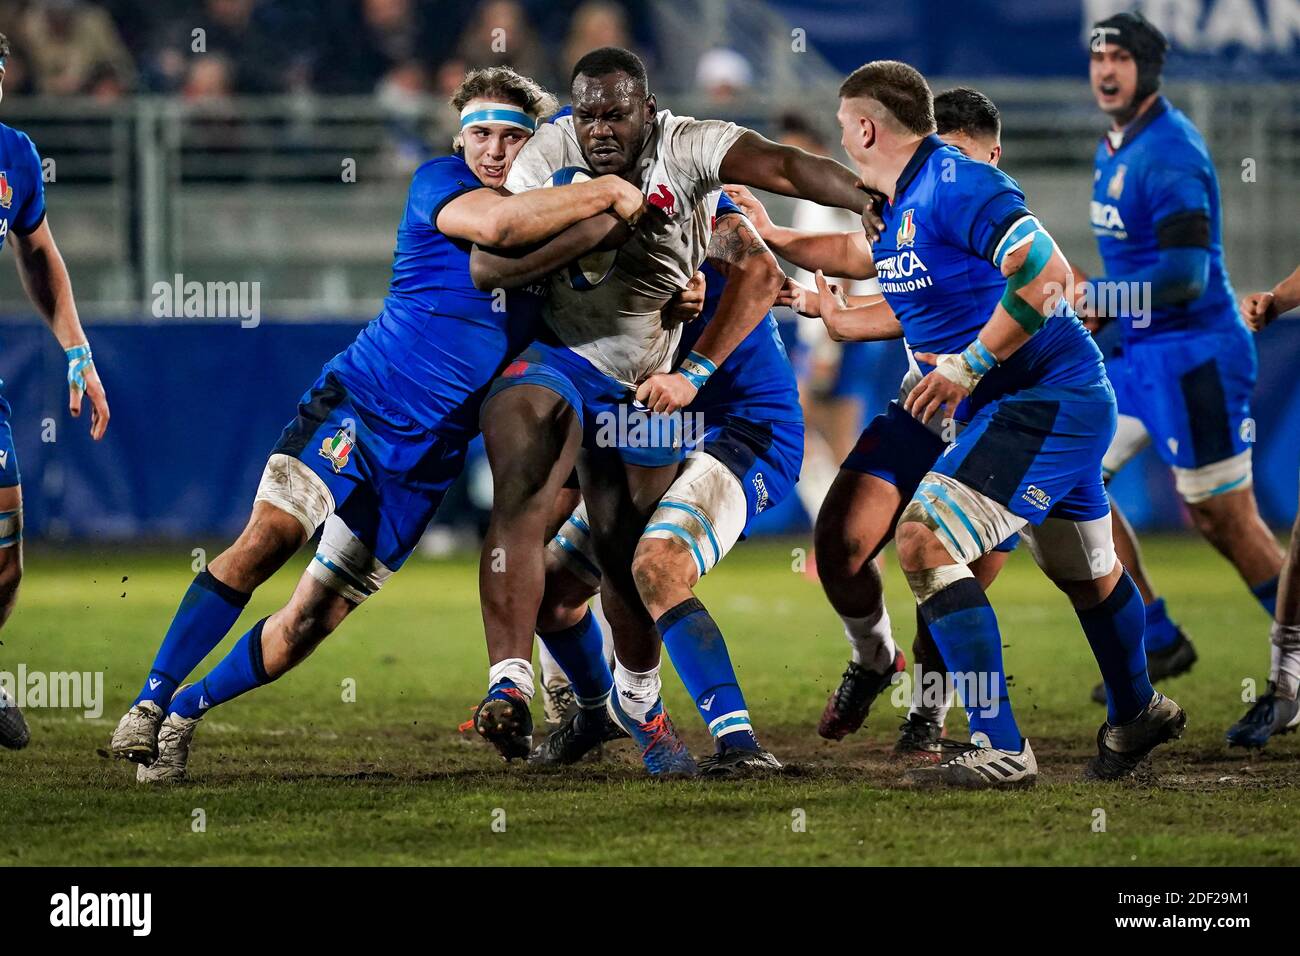 Jordan Joseph (FRA) during the Six Nations Under 20 rugby union tournament  match between France U20 and Italia U20 at the stade Maurice David, in  Aix-En-Provence, on February 7, 2020. Photo by